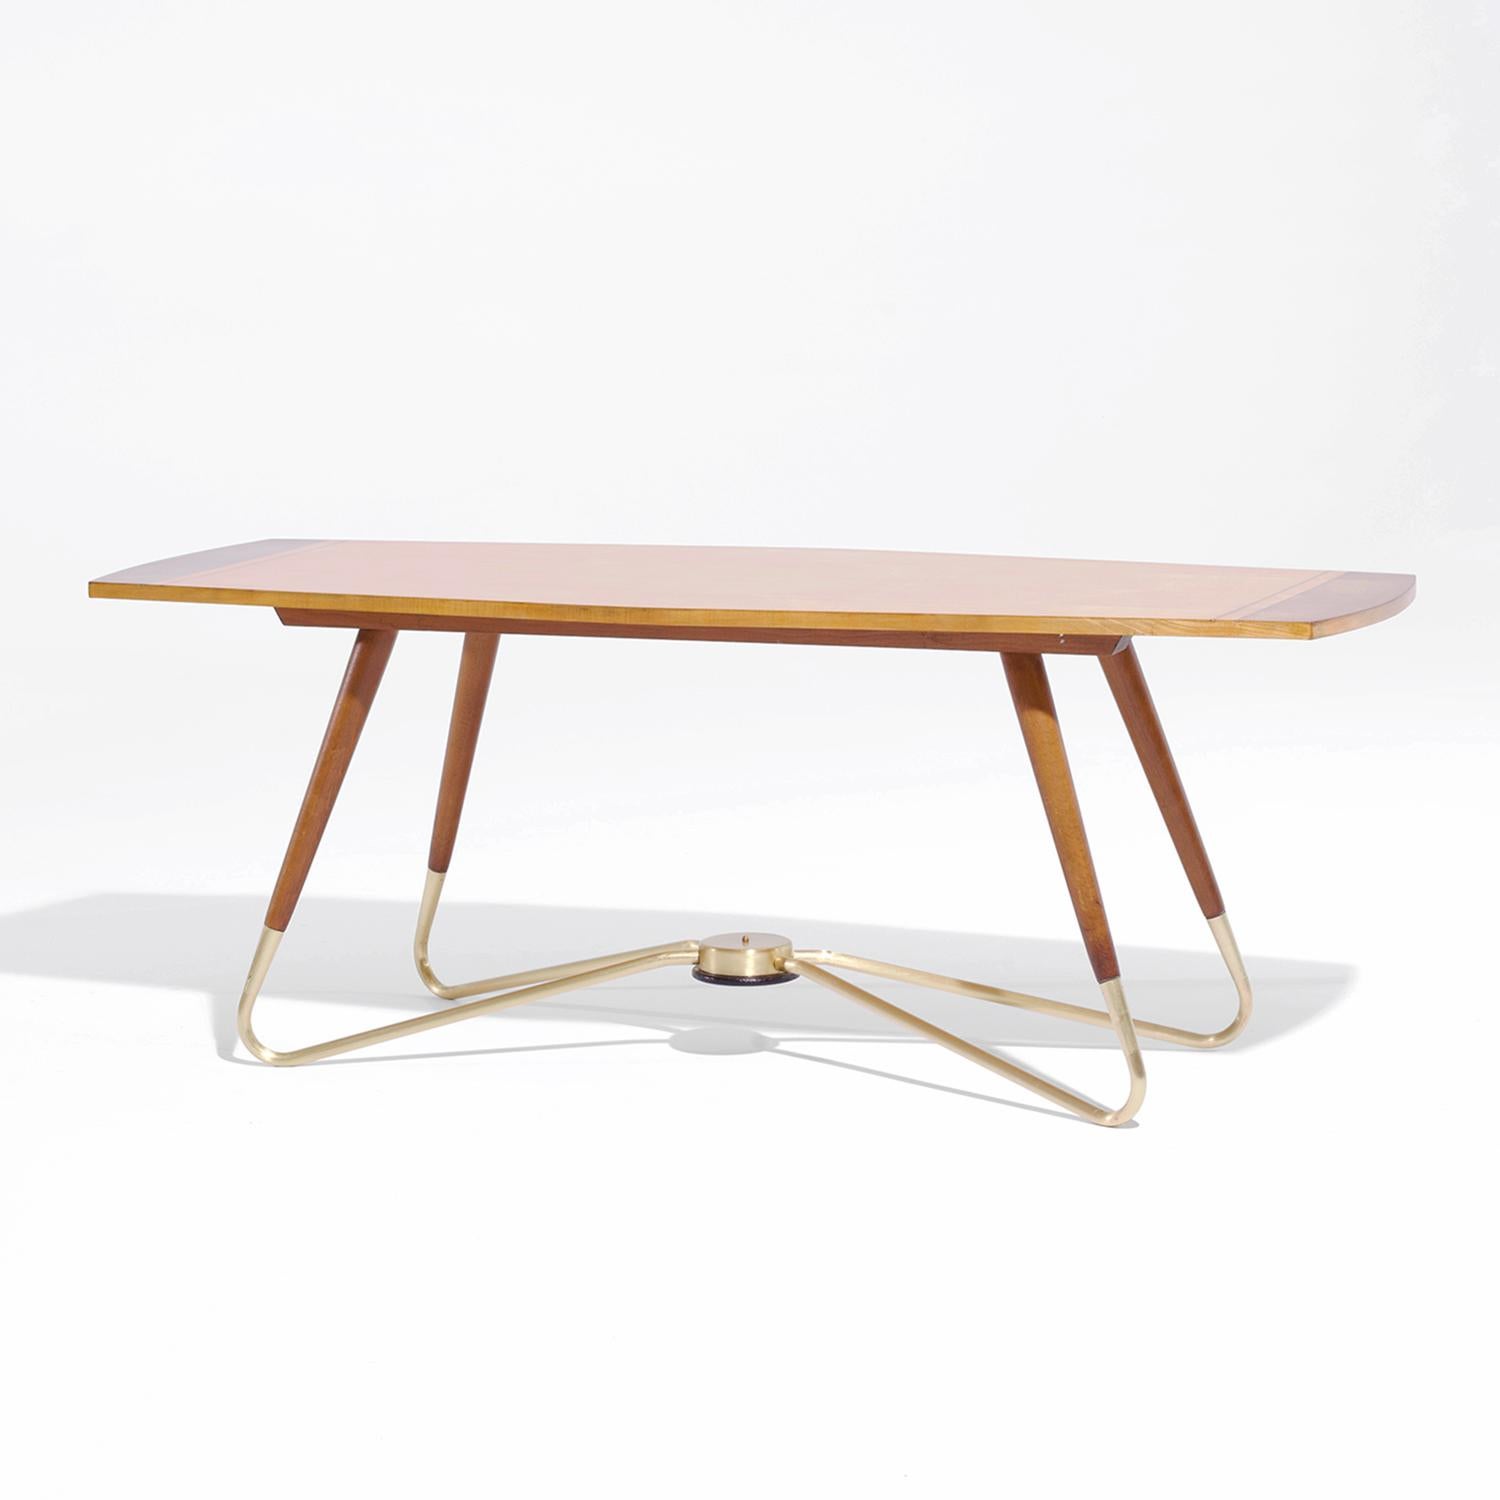 20th Century German Modern Maplewood Coffee Table - Sofa Table by Ilse Möbel For Sale 2